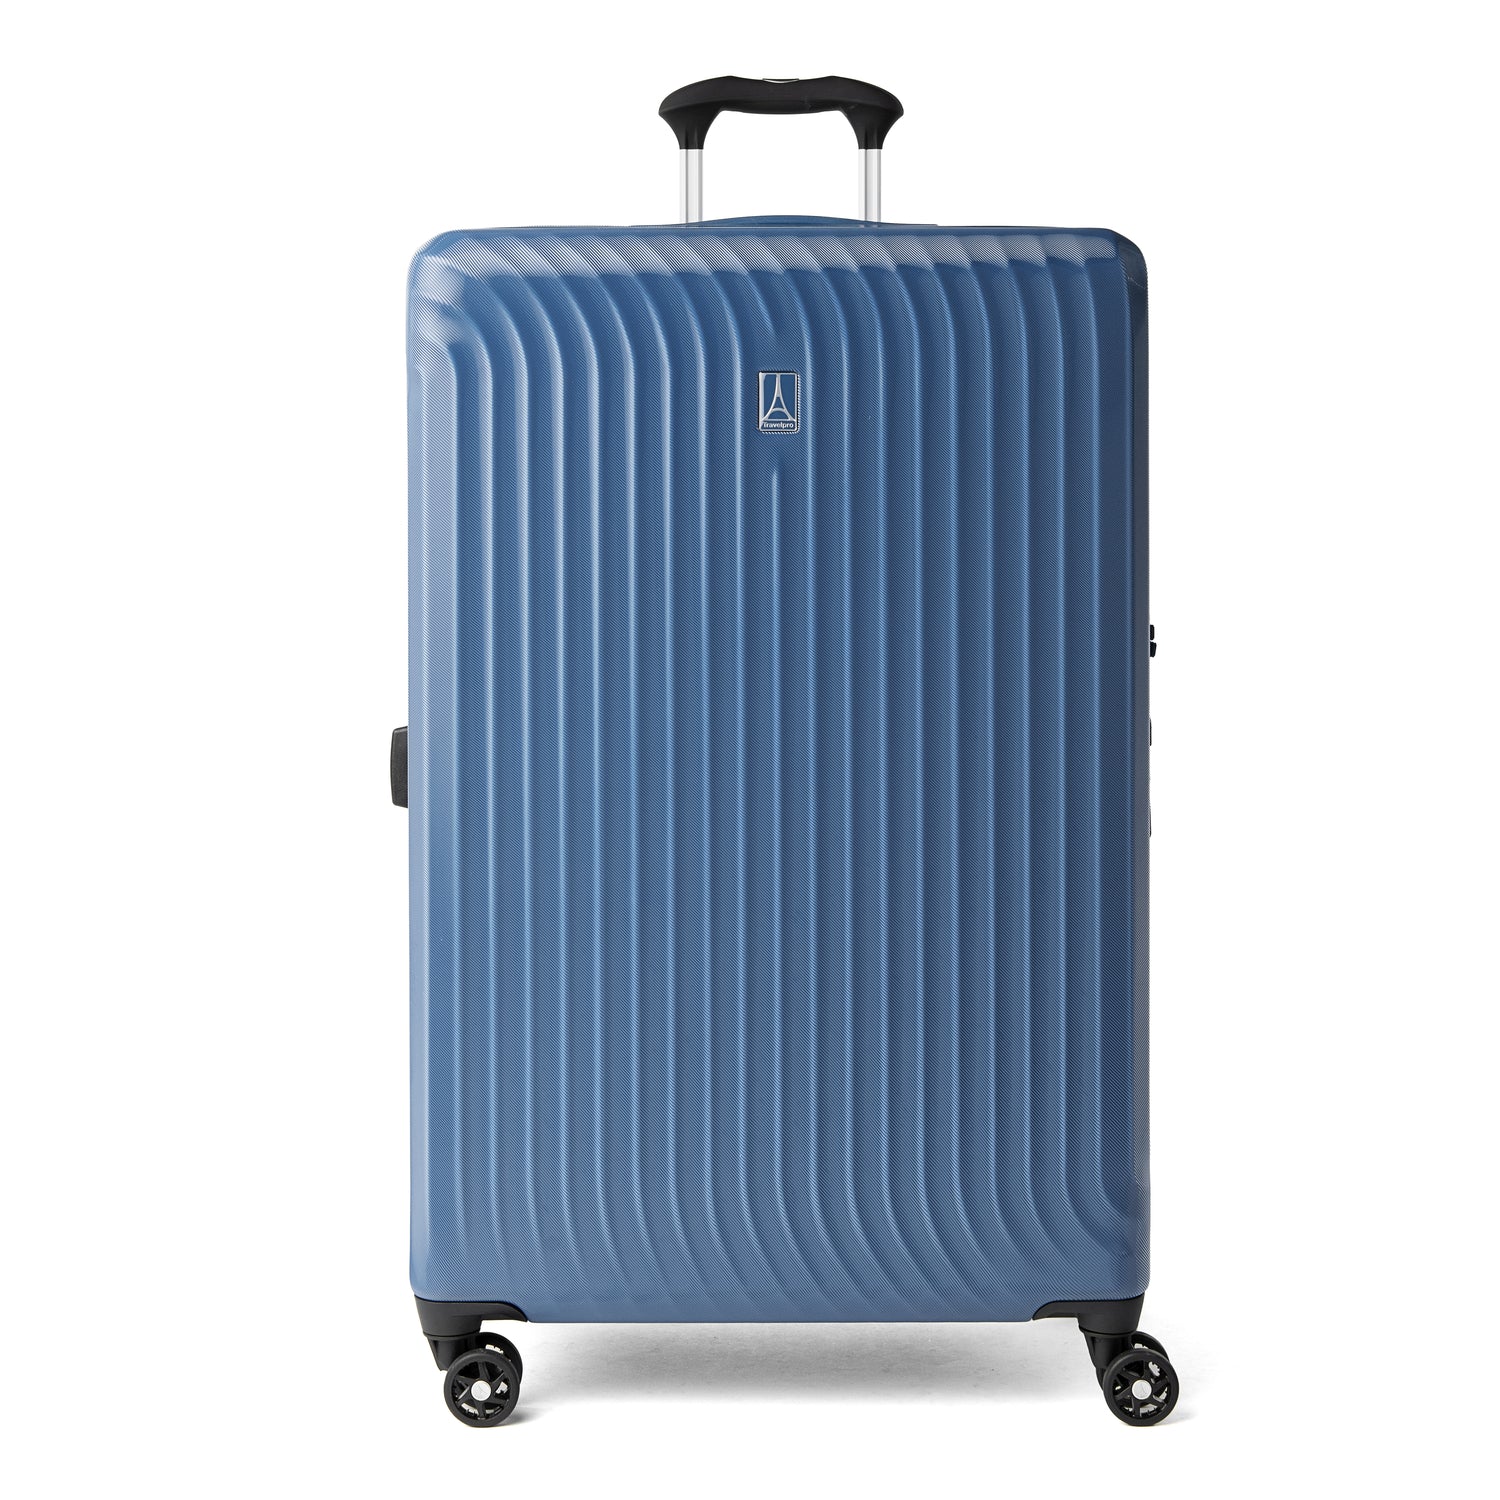 Travelpro Maxlite Air Large Check-in Expandable Hardside Spinner Luggage - Ensign Blue